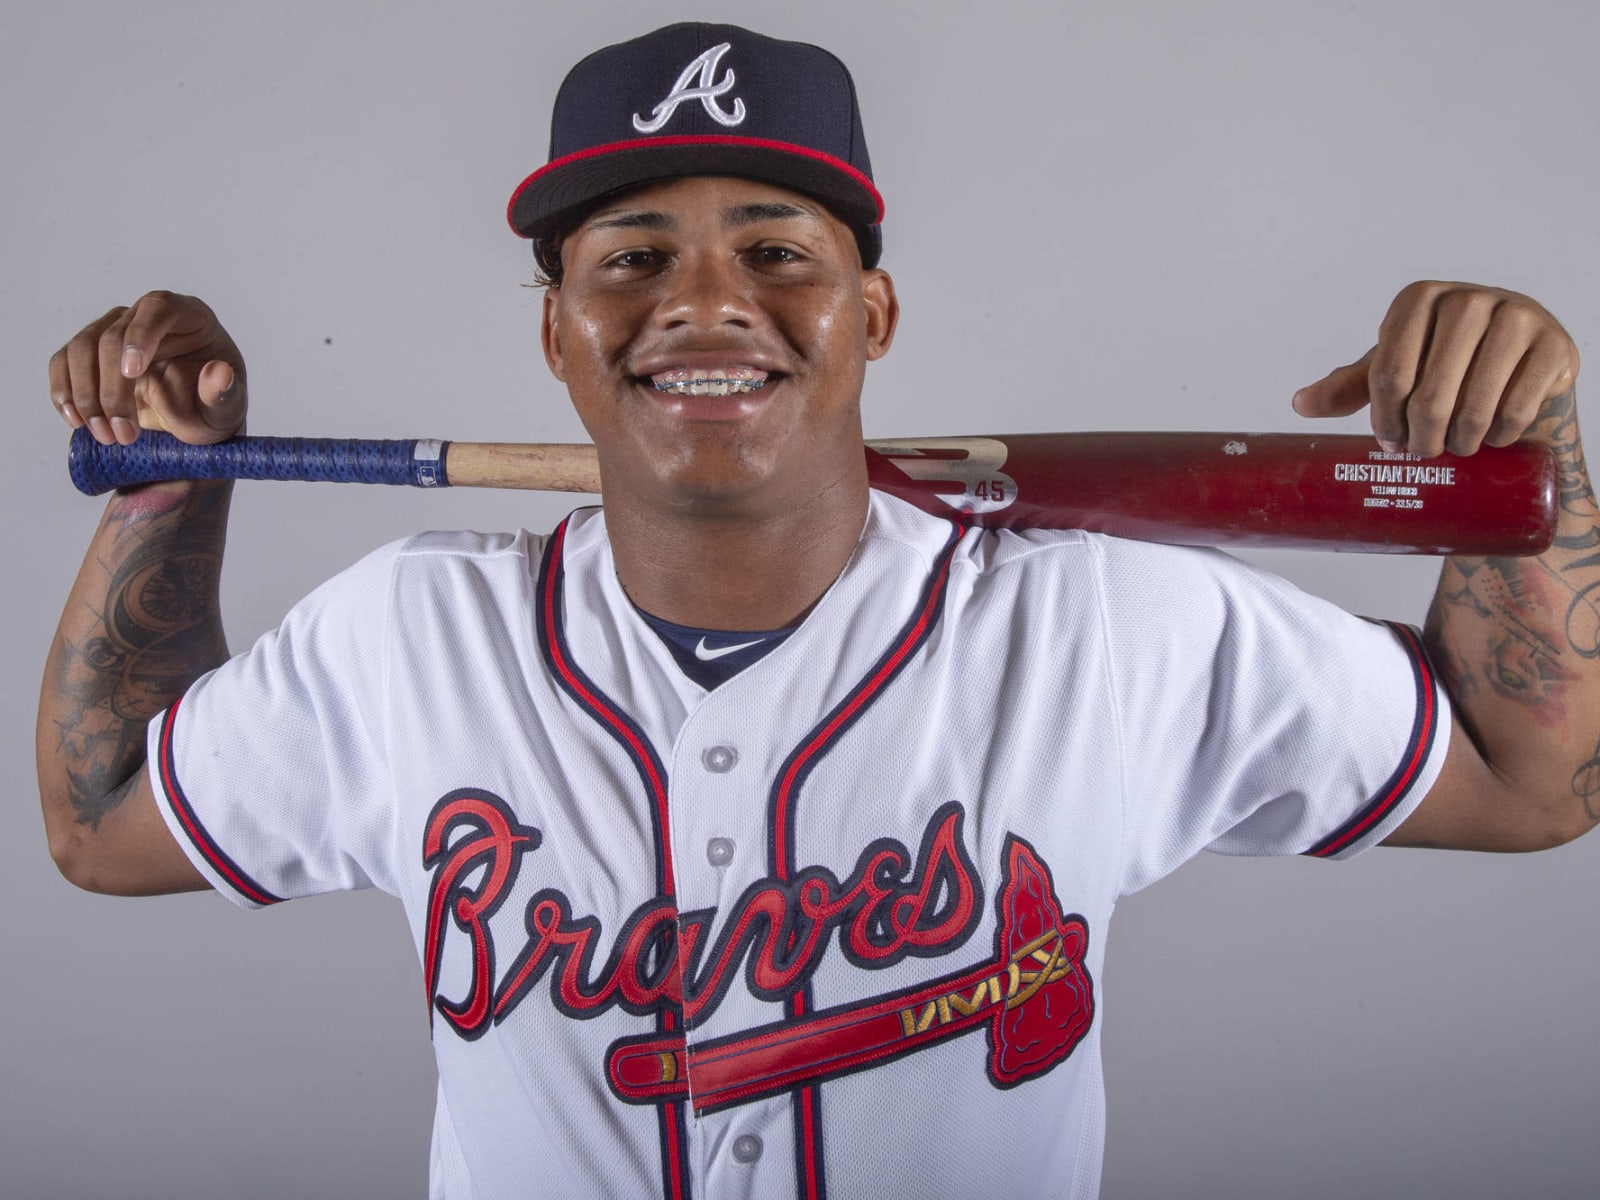 Thoughts on Atlanta Braves exciting prospect Cristian Pache